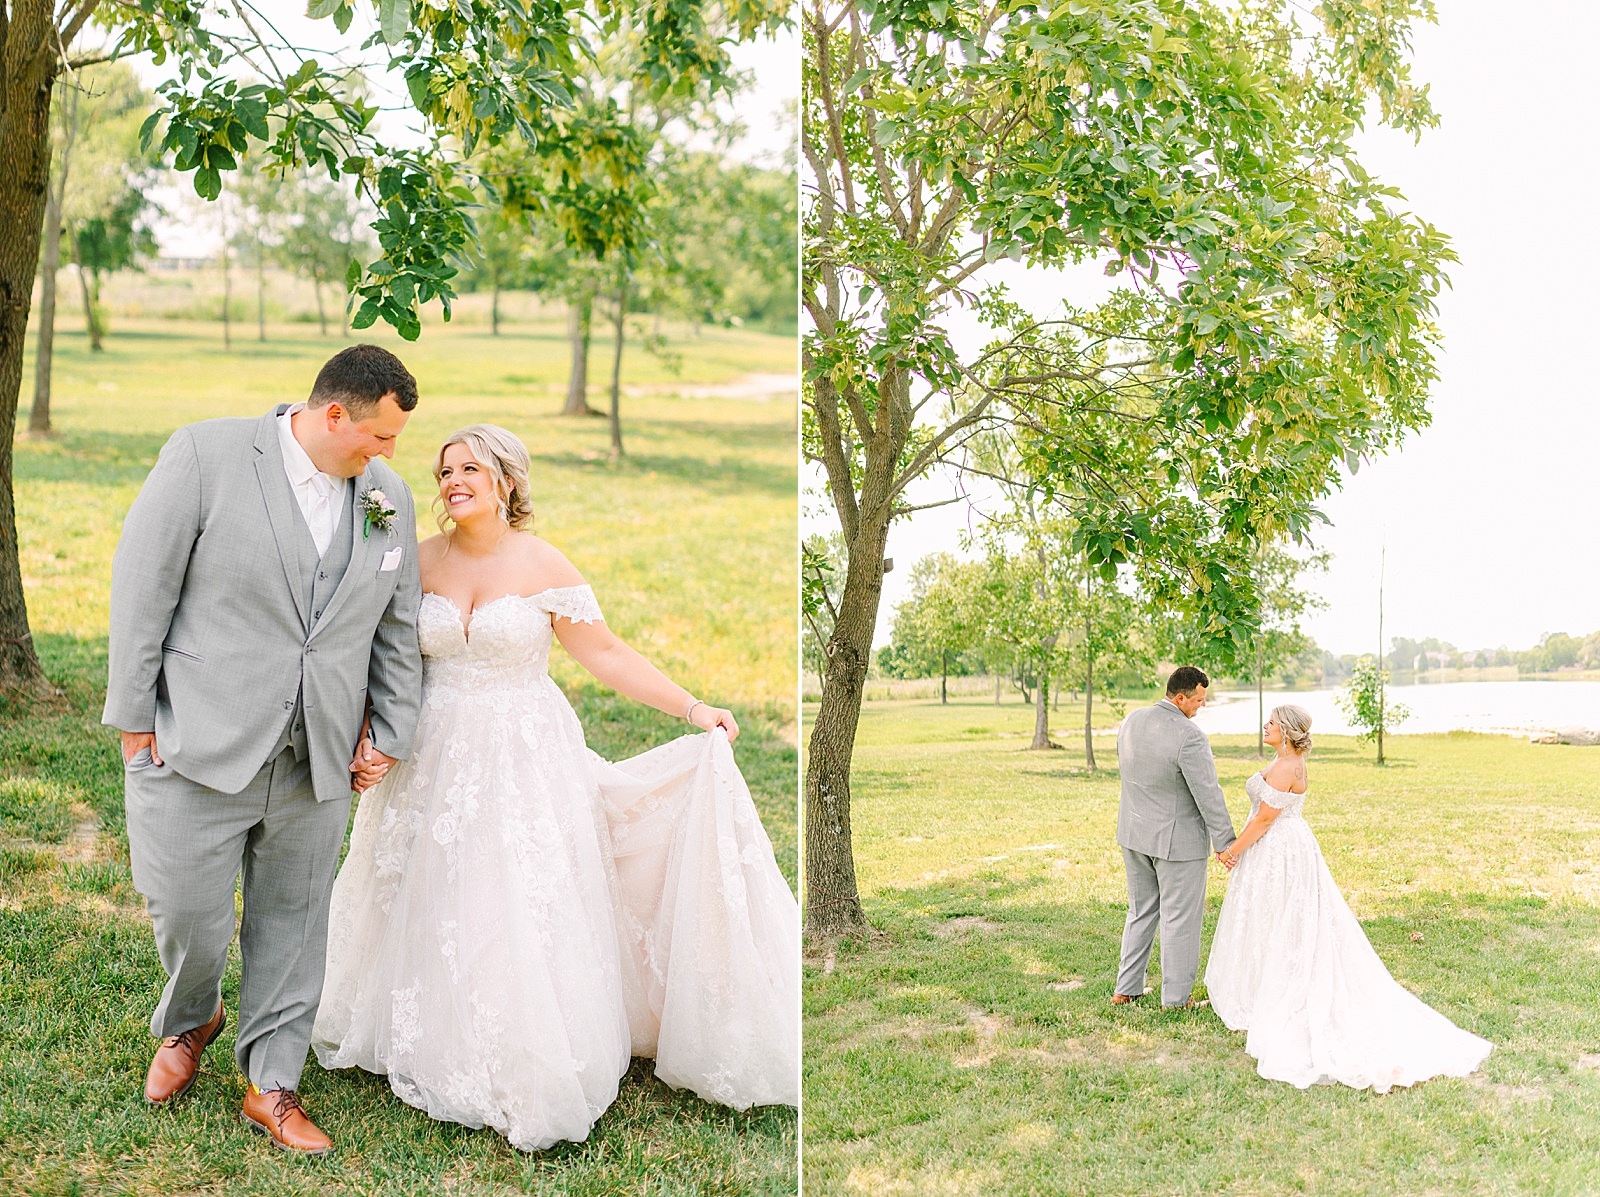 A Sunny Summer Wedding at Friedman Park in Newburgh Indiana | Paige and Dylan | Bret and Brandie Photography087.jpg